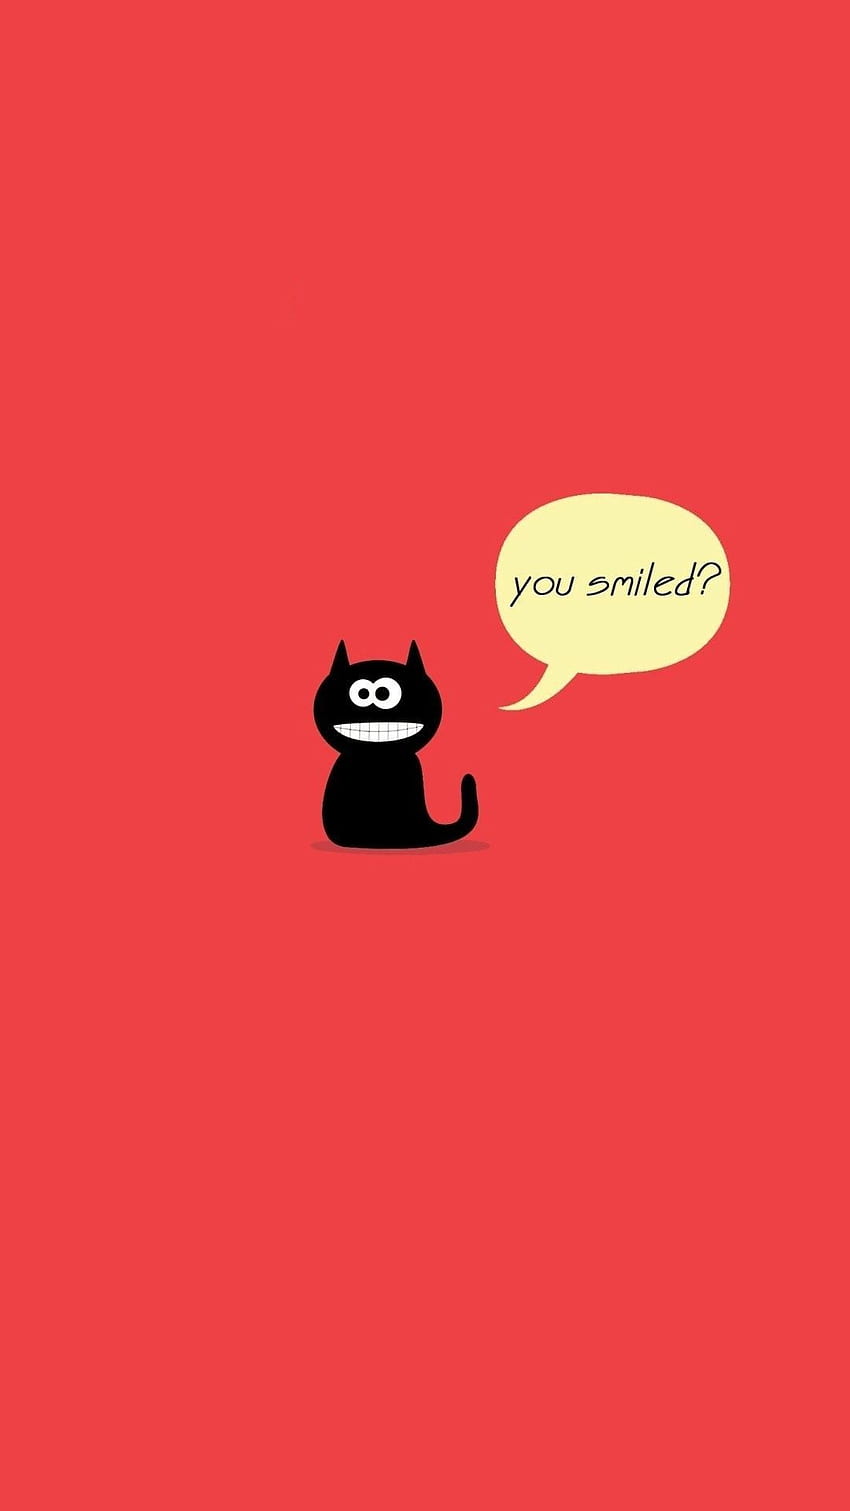 Red background with a black cat and a speech bubble saying 